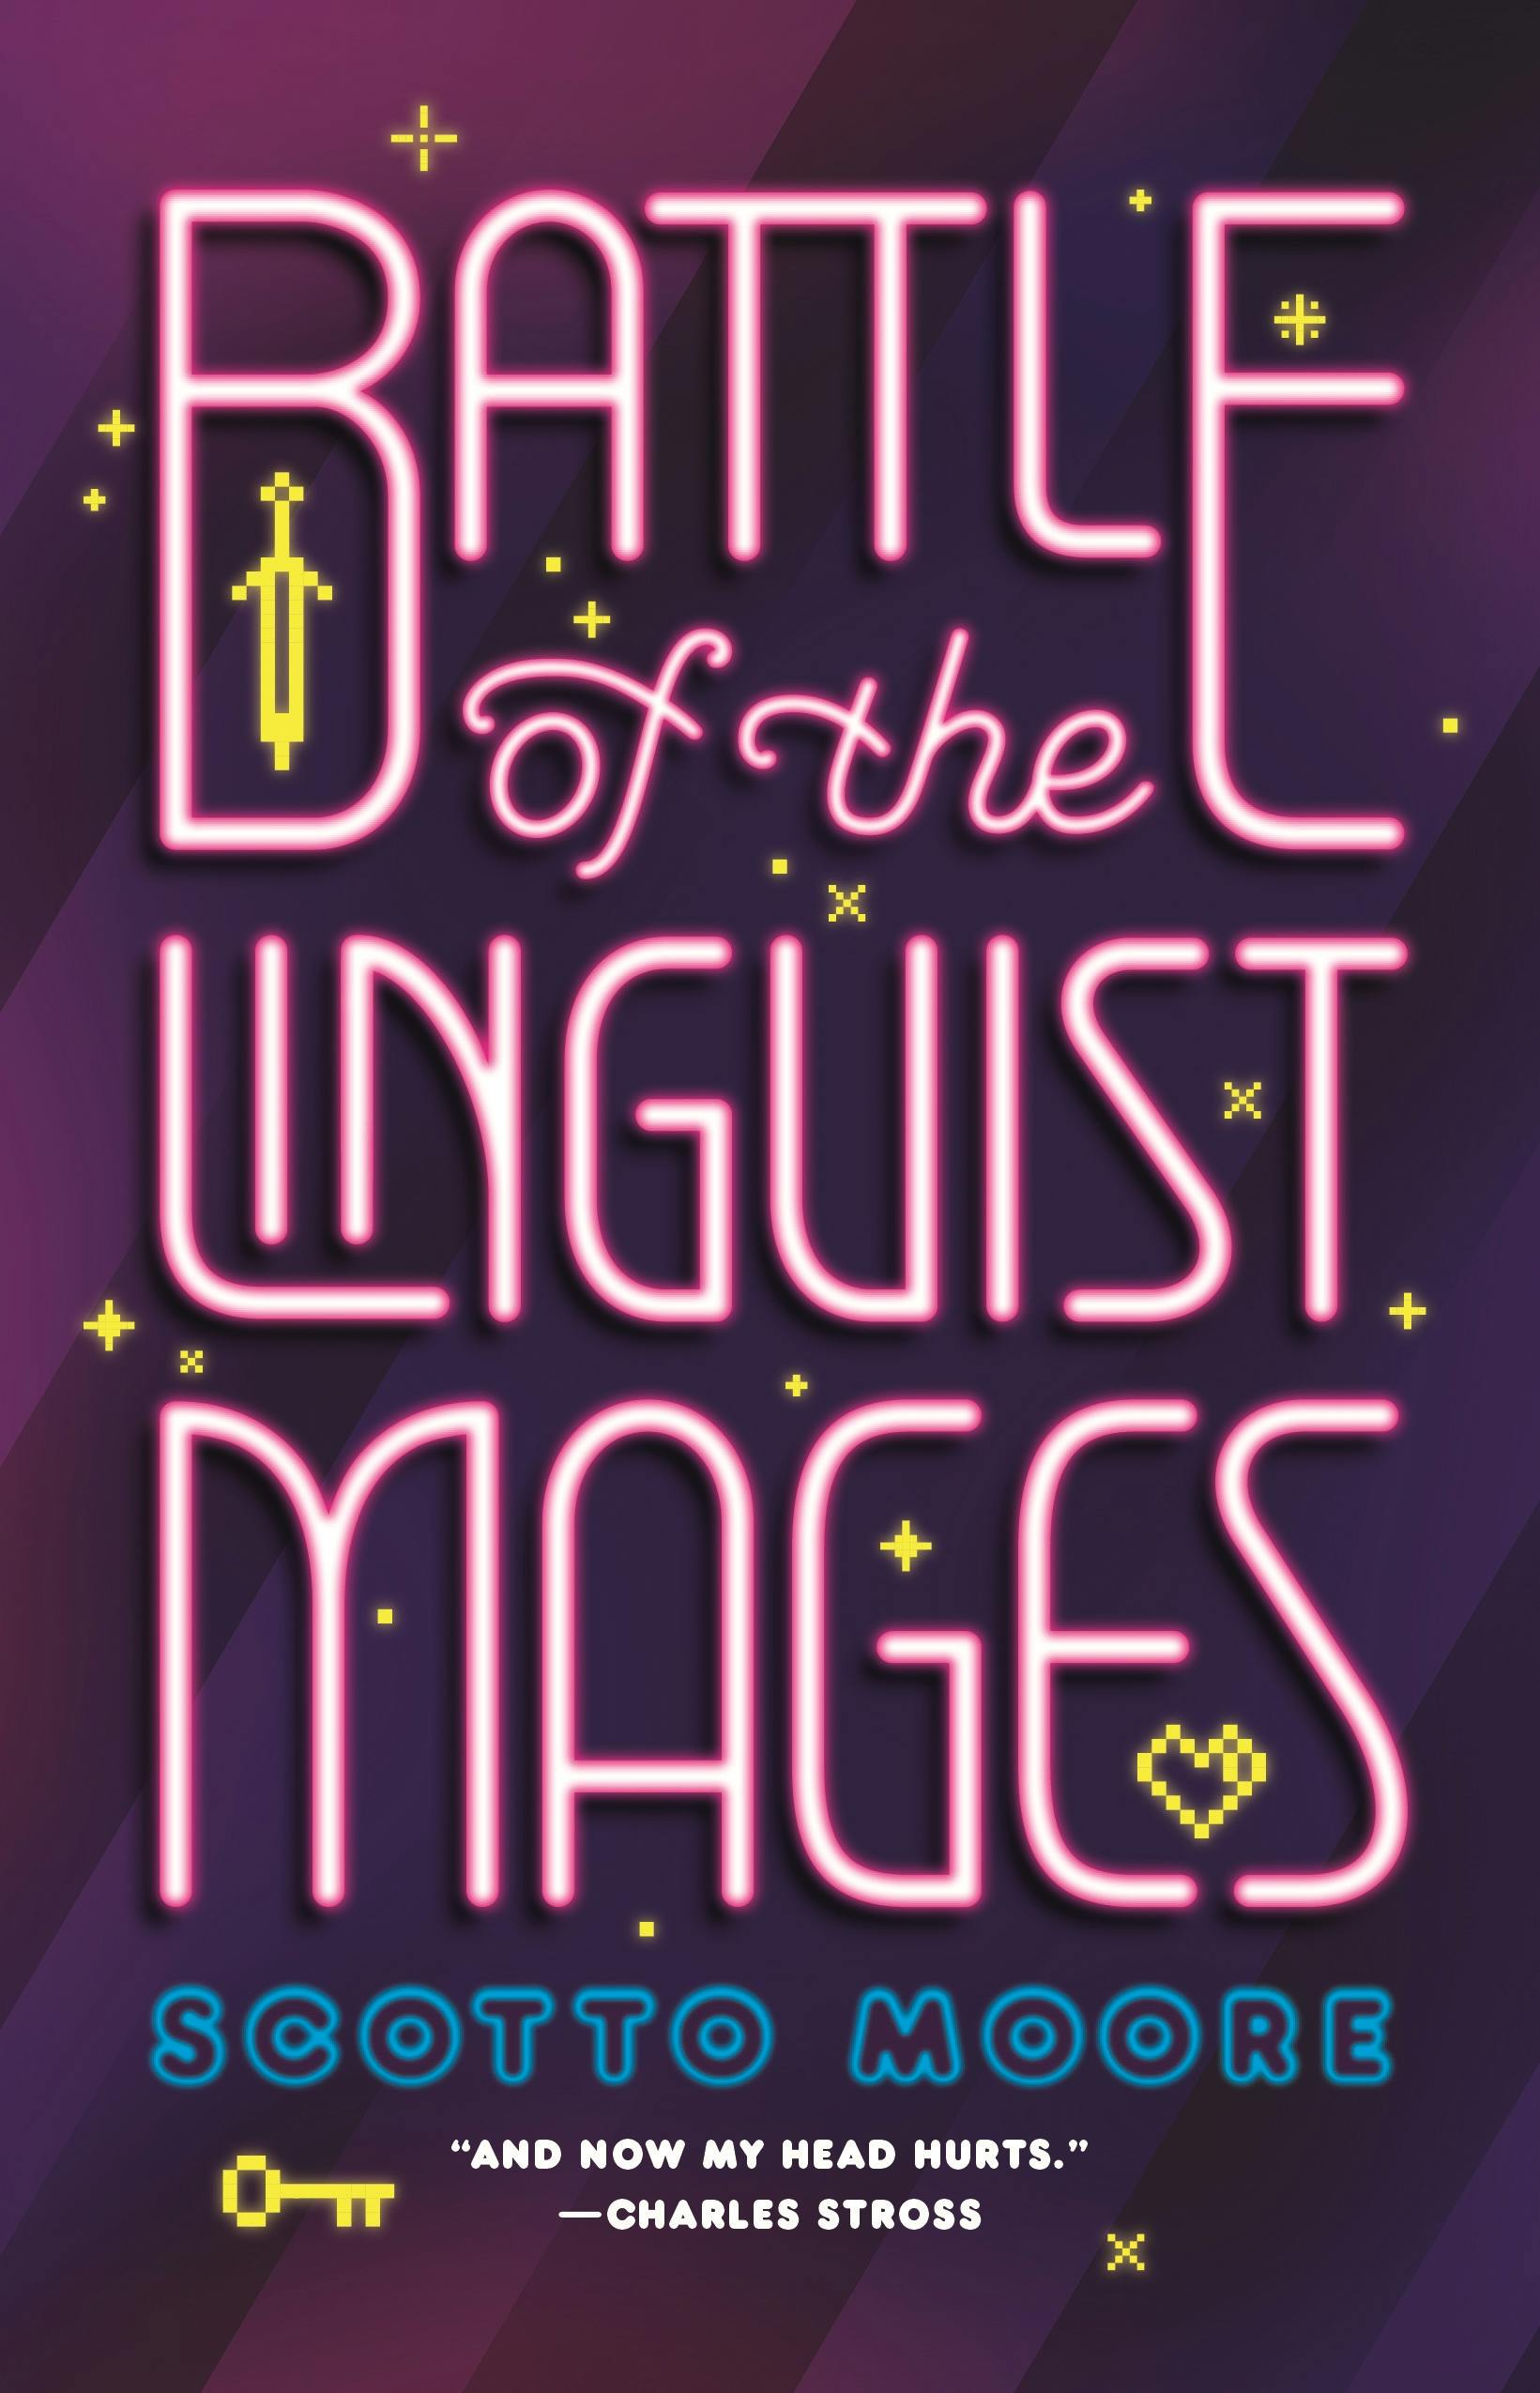 Cover for the book titled as: Battle of the Linguist Mages